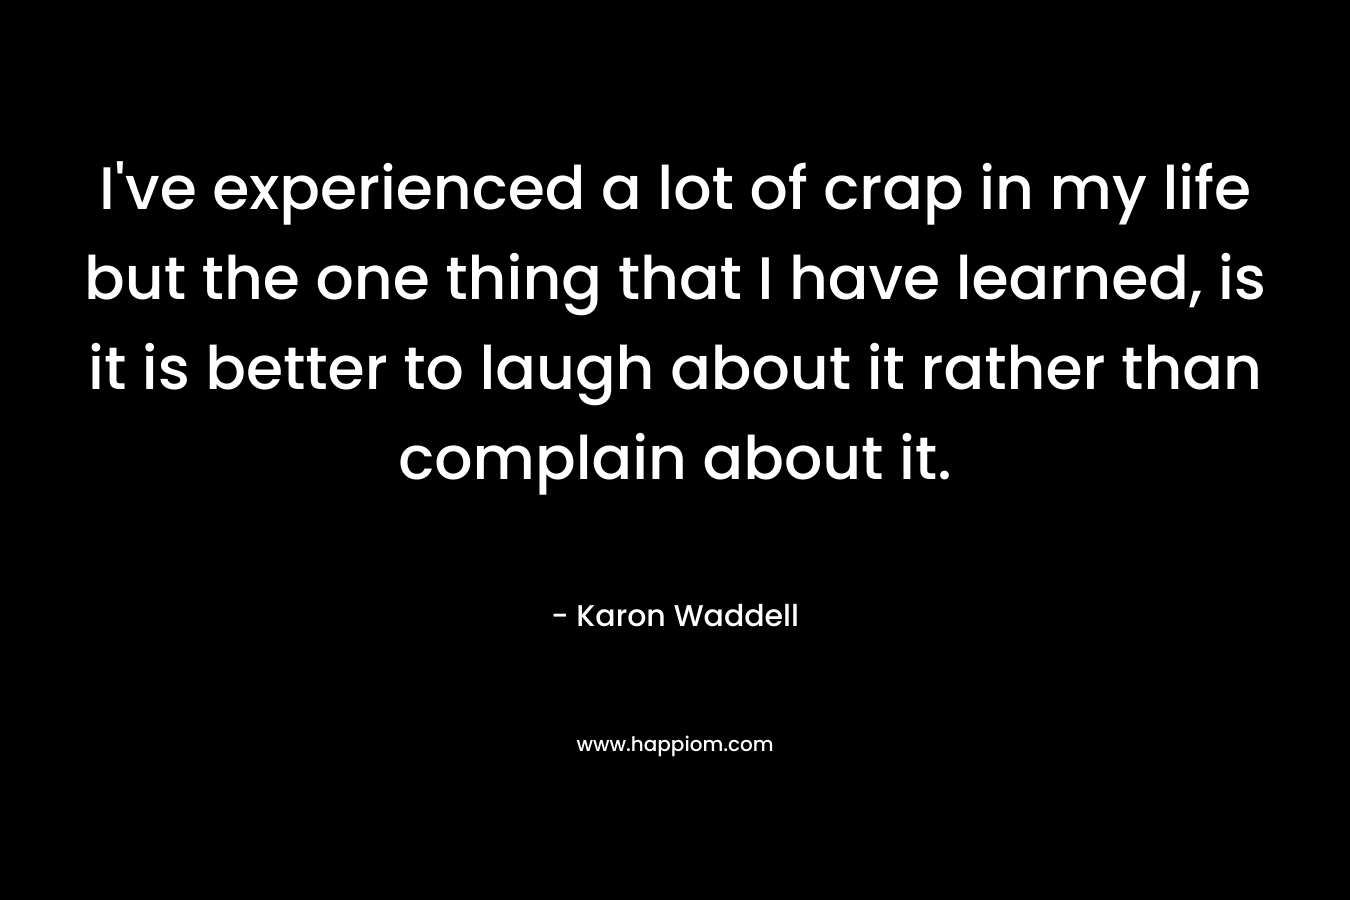 I’ve experienced a lot of crap in my life but the one thing that I have learned, is it is better to laugh about it rather than complain about it. – Karon Waddell